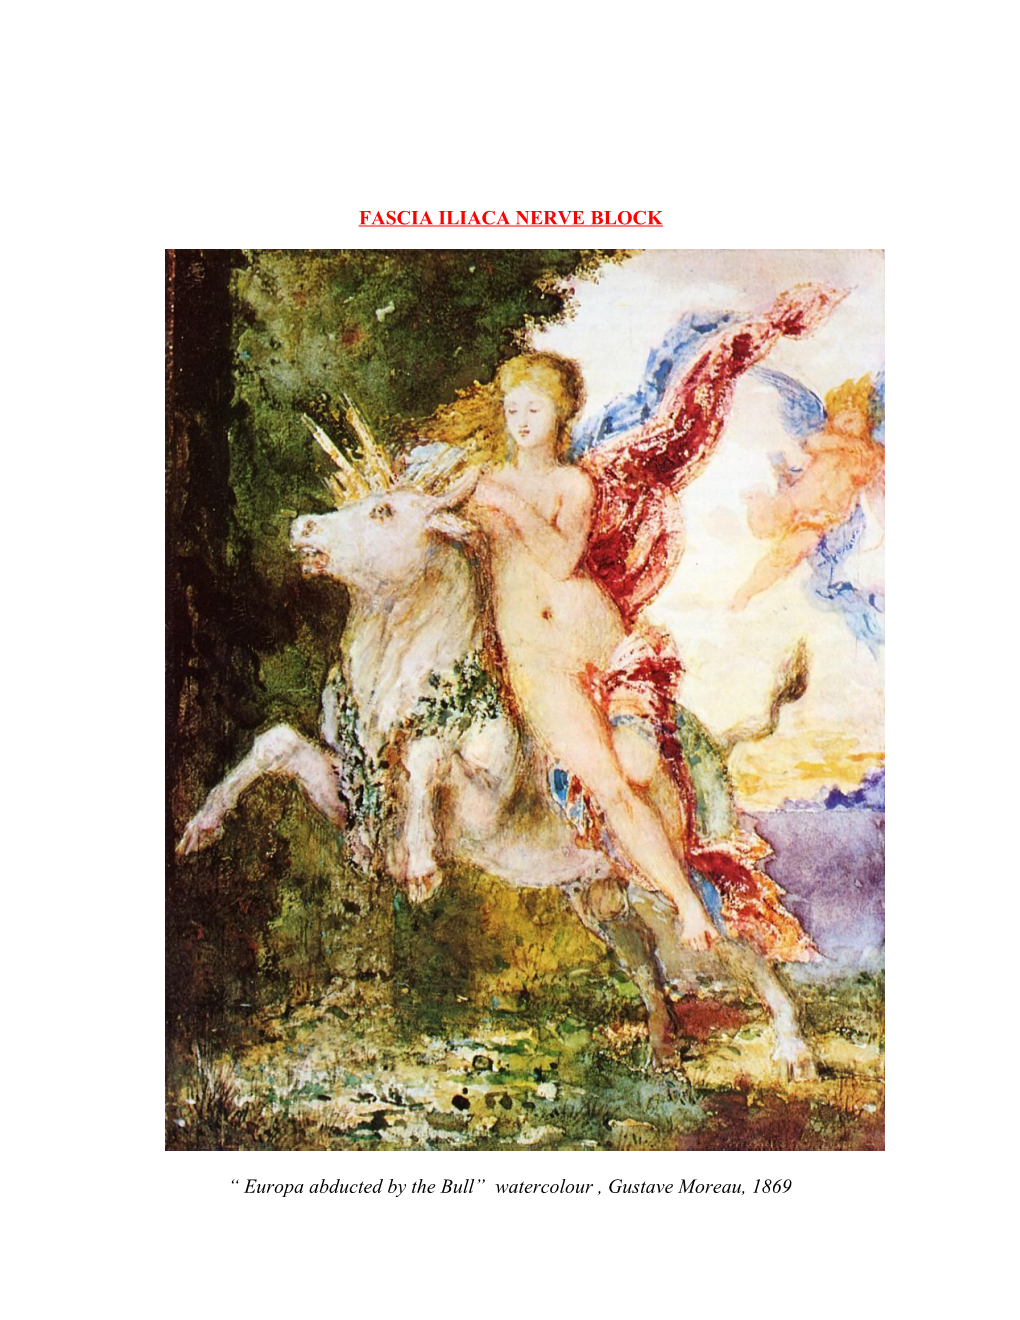 Europa Abducted by the Bull Watercolour , Gustave Moreau, 1869